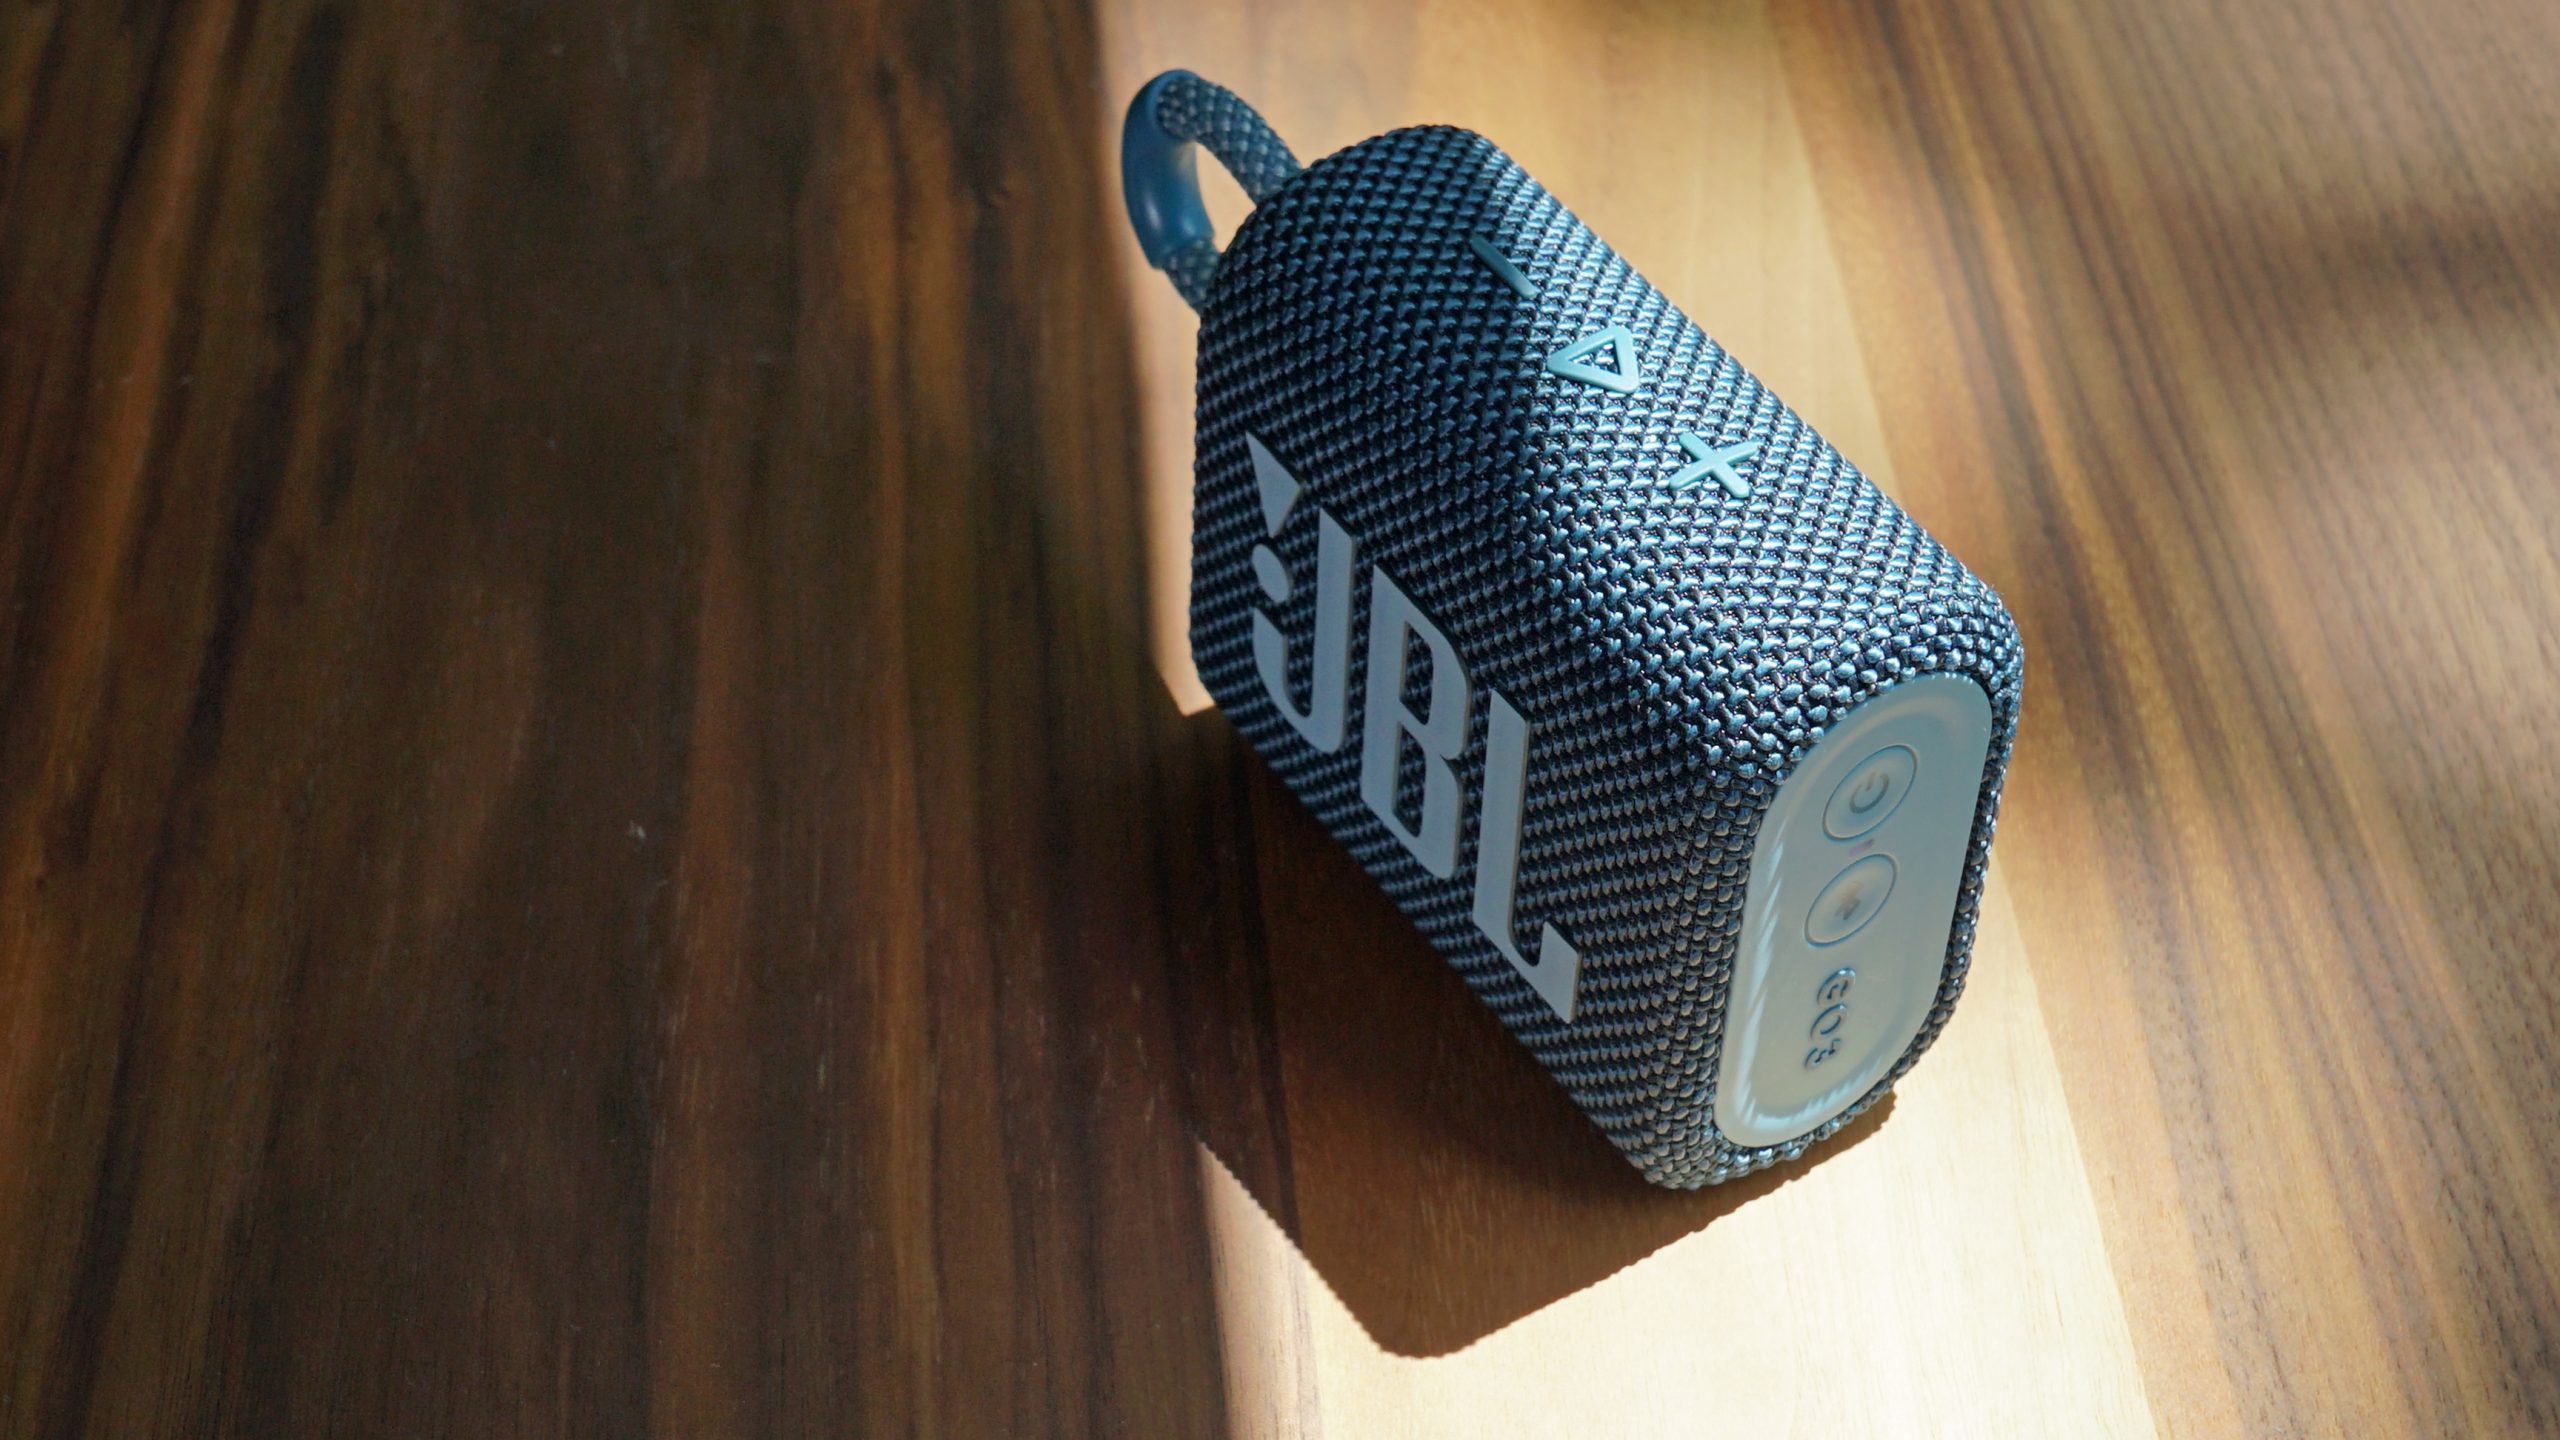 JBL Go 3 review: Tiny $40 Bluetooth speaker with big improvements - CNET